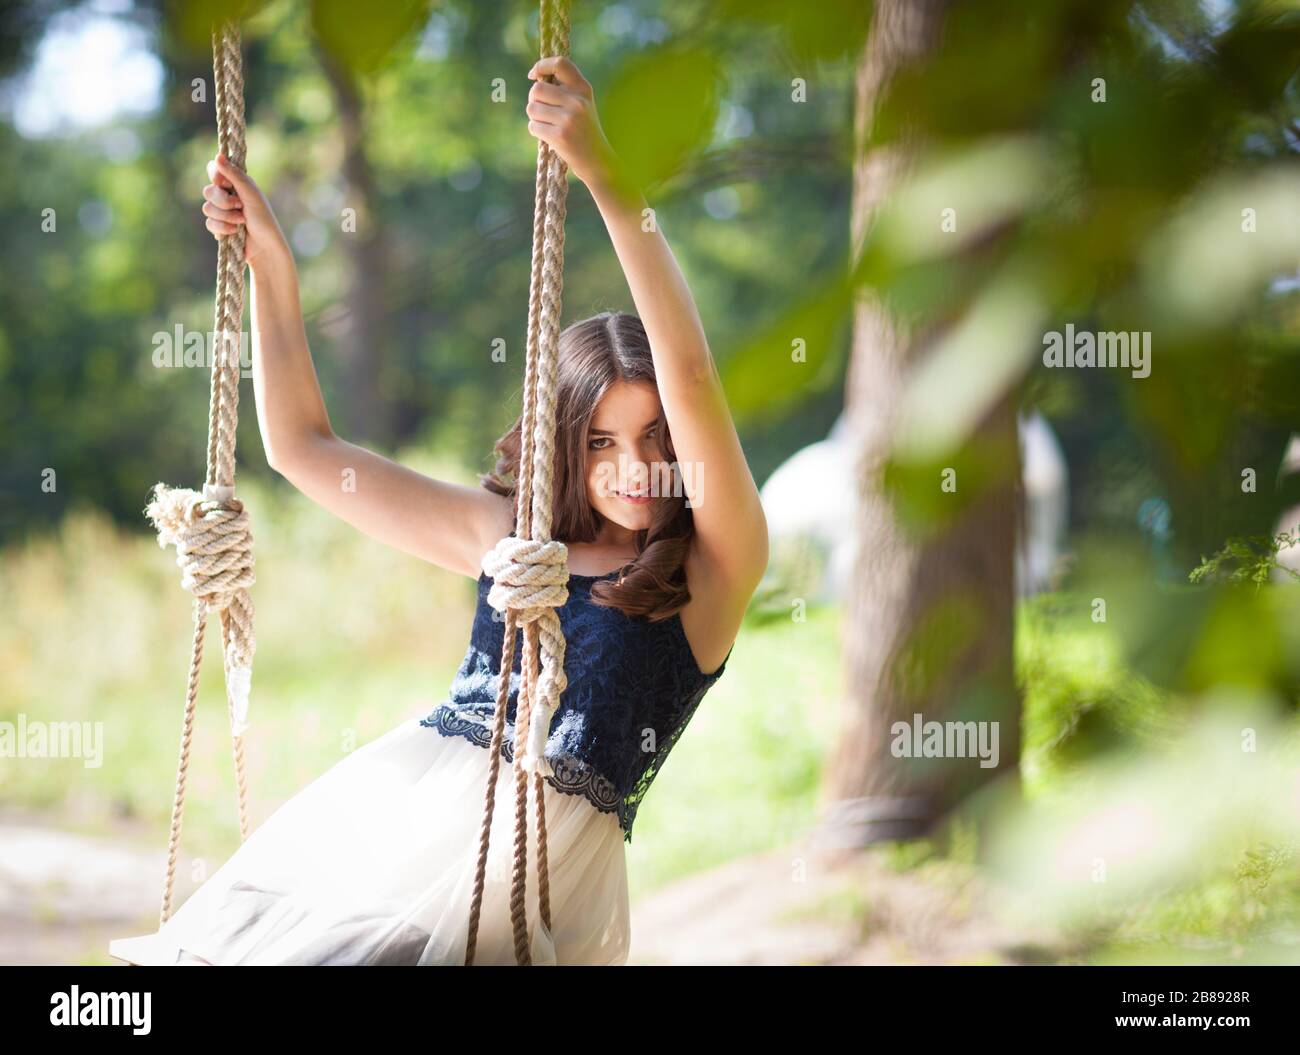 Front view of beautiful elegant lady swinging on hanging swing. Charming  girl in stylish dress holding ropes and looking at camera with cute smile.  Co Stock Photo - Alamy